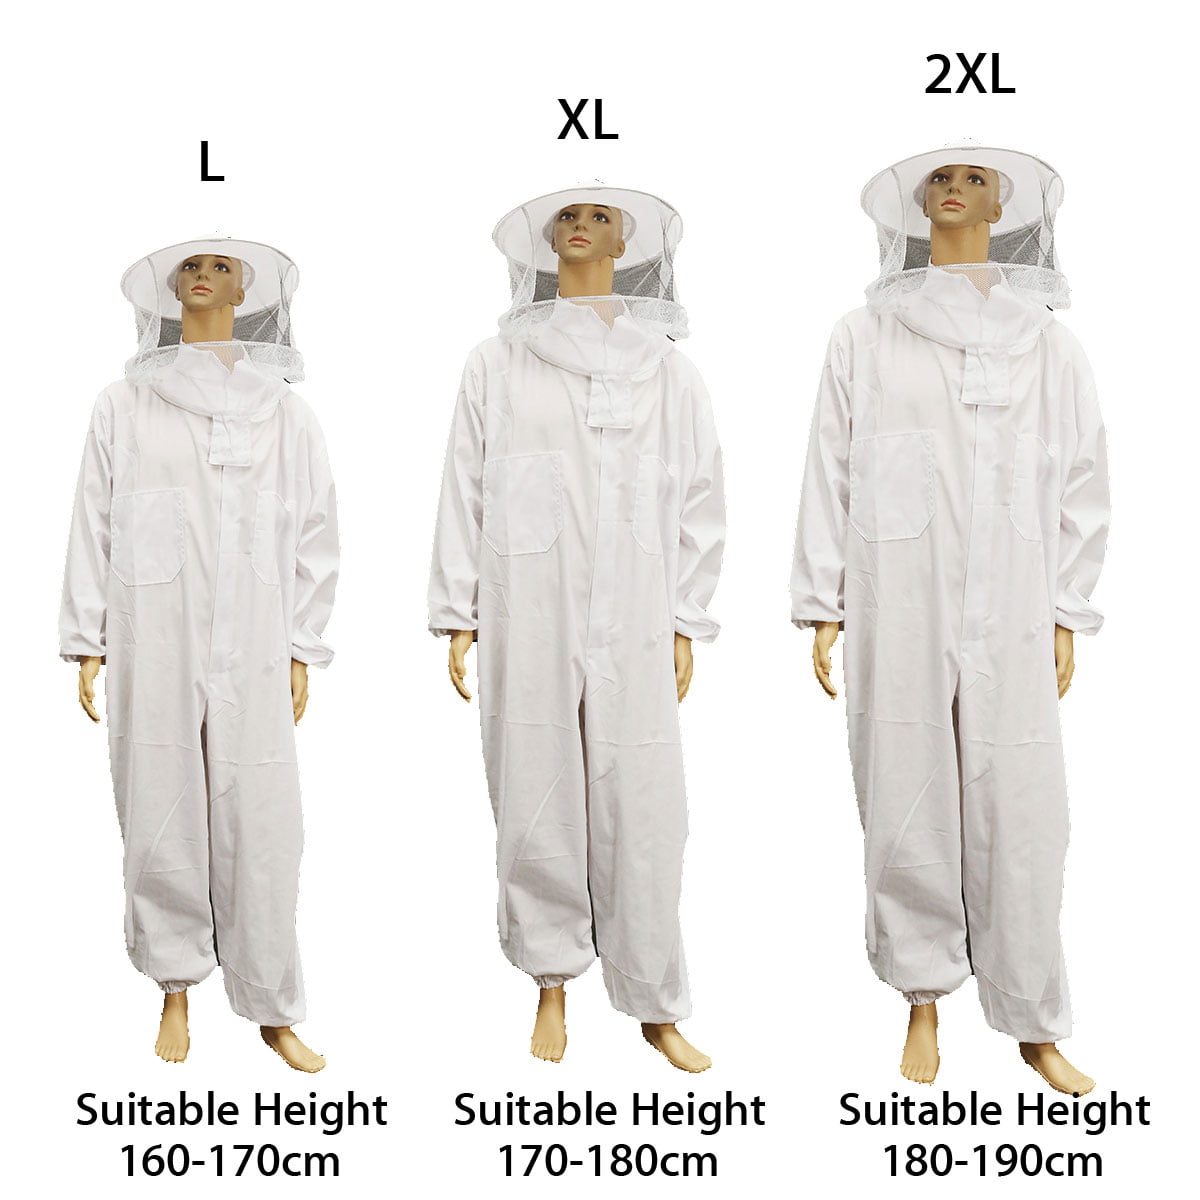 Professional Beekeeping Suit Jacket Pull Over with Fencing Veil Hood for Beginner & Commercial Beekeepers 2XL White 